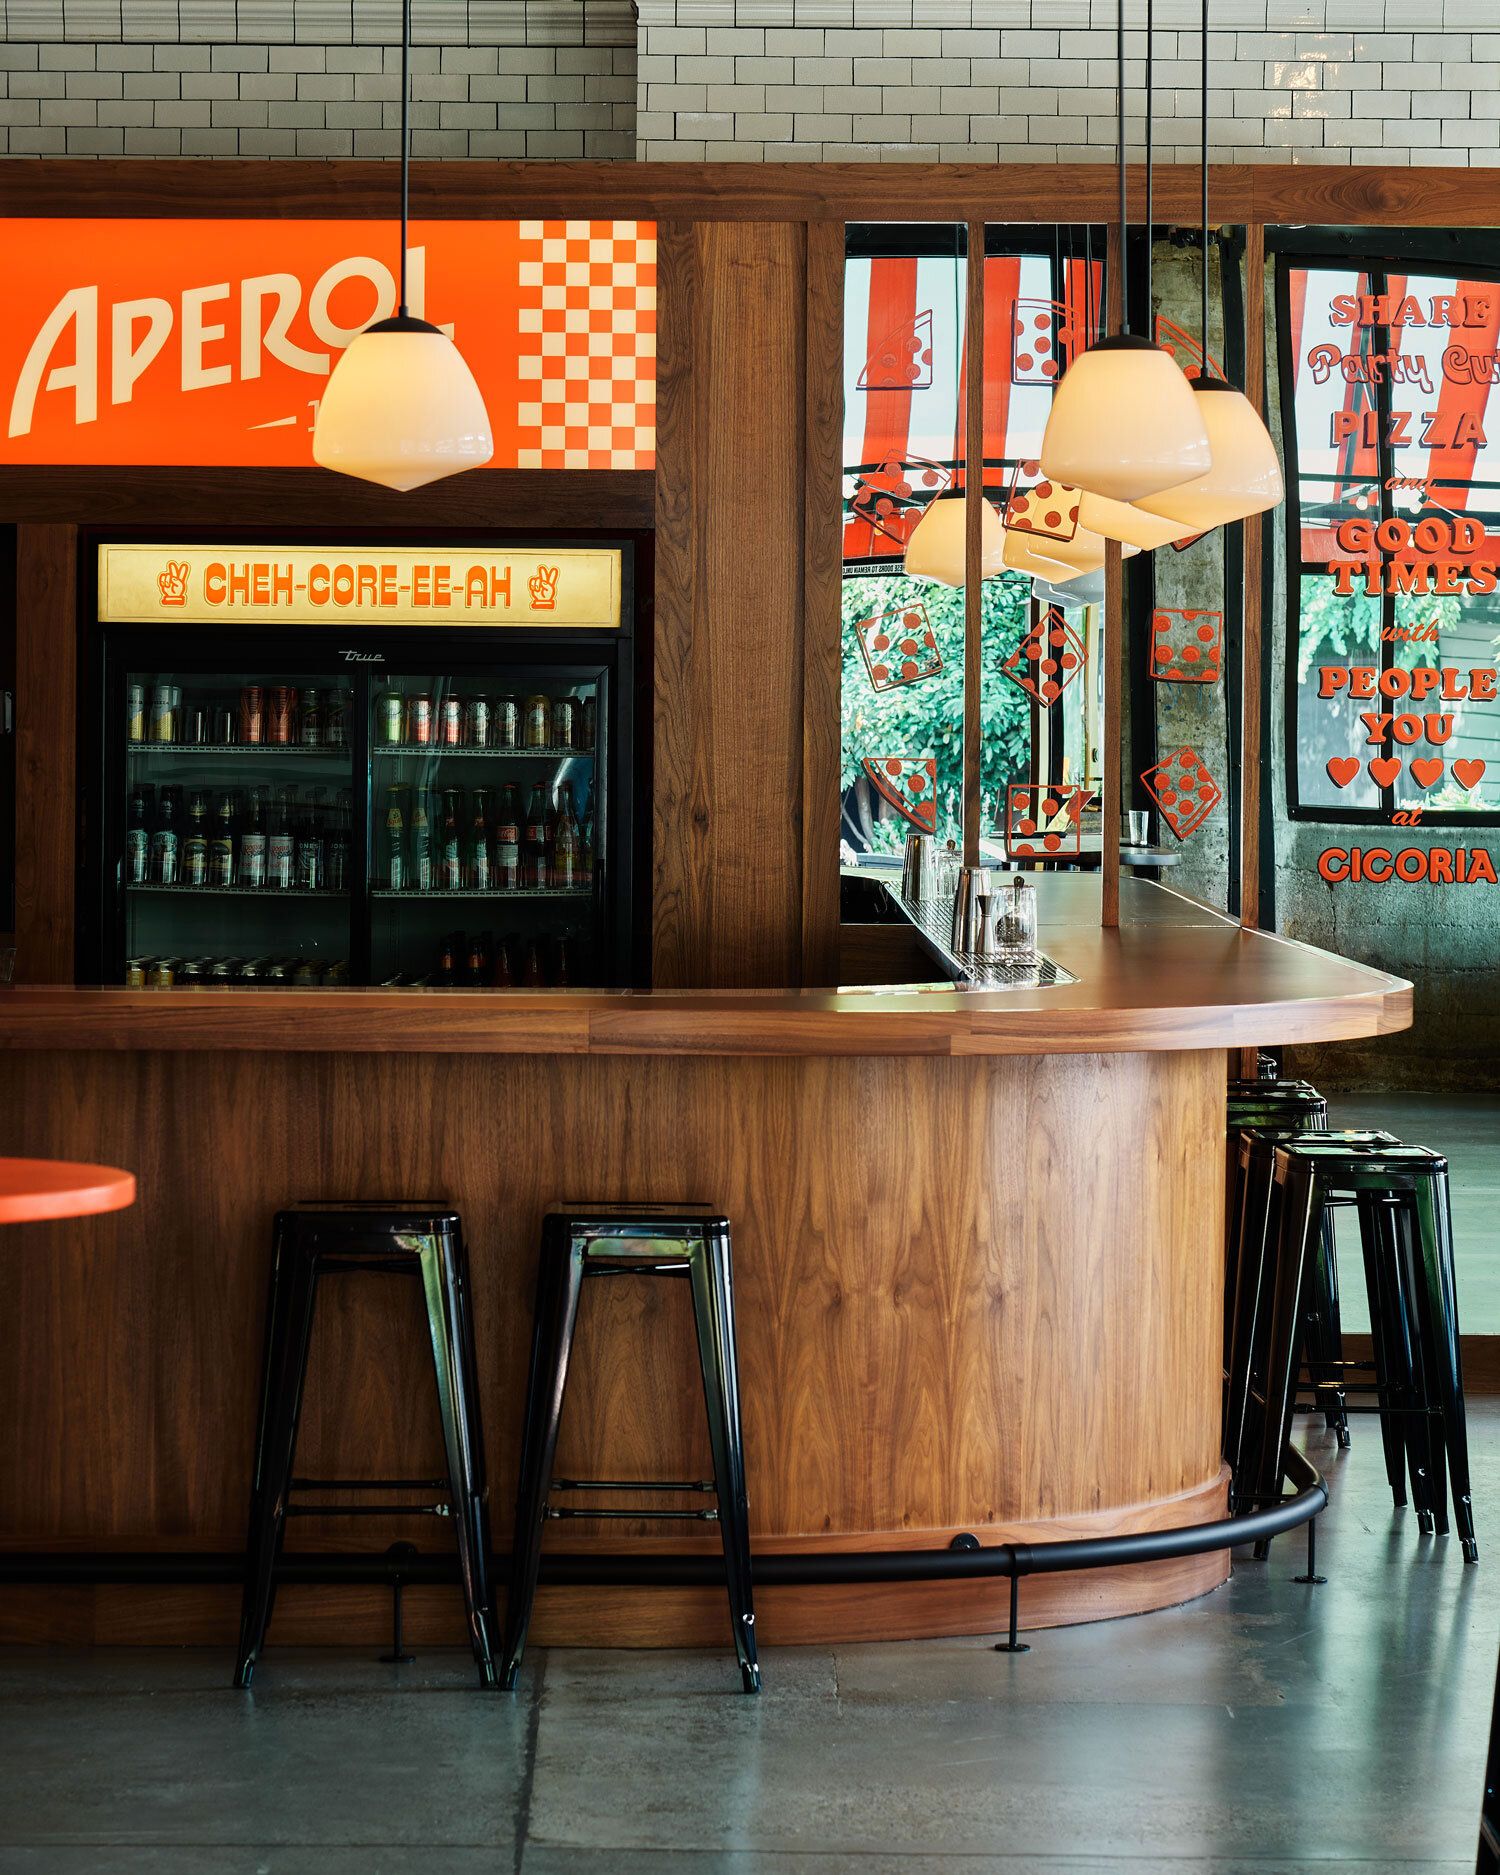 The bar sits empty at Cicoria ready to host customers. A sign reads "Aperol" above a fridge stacked with beverages.